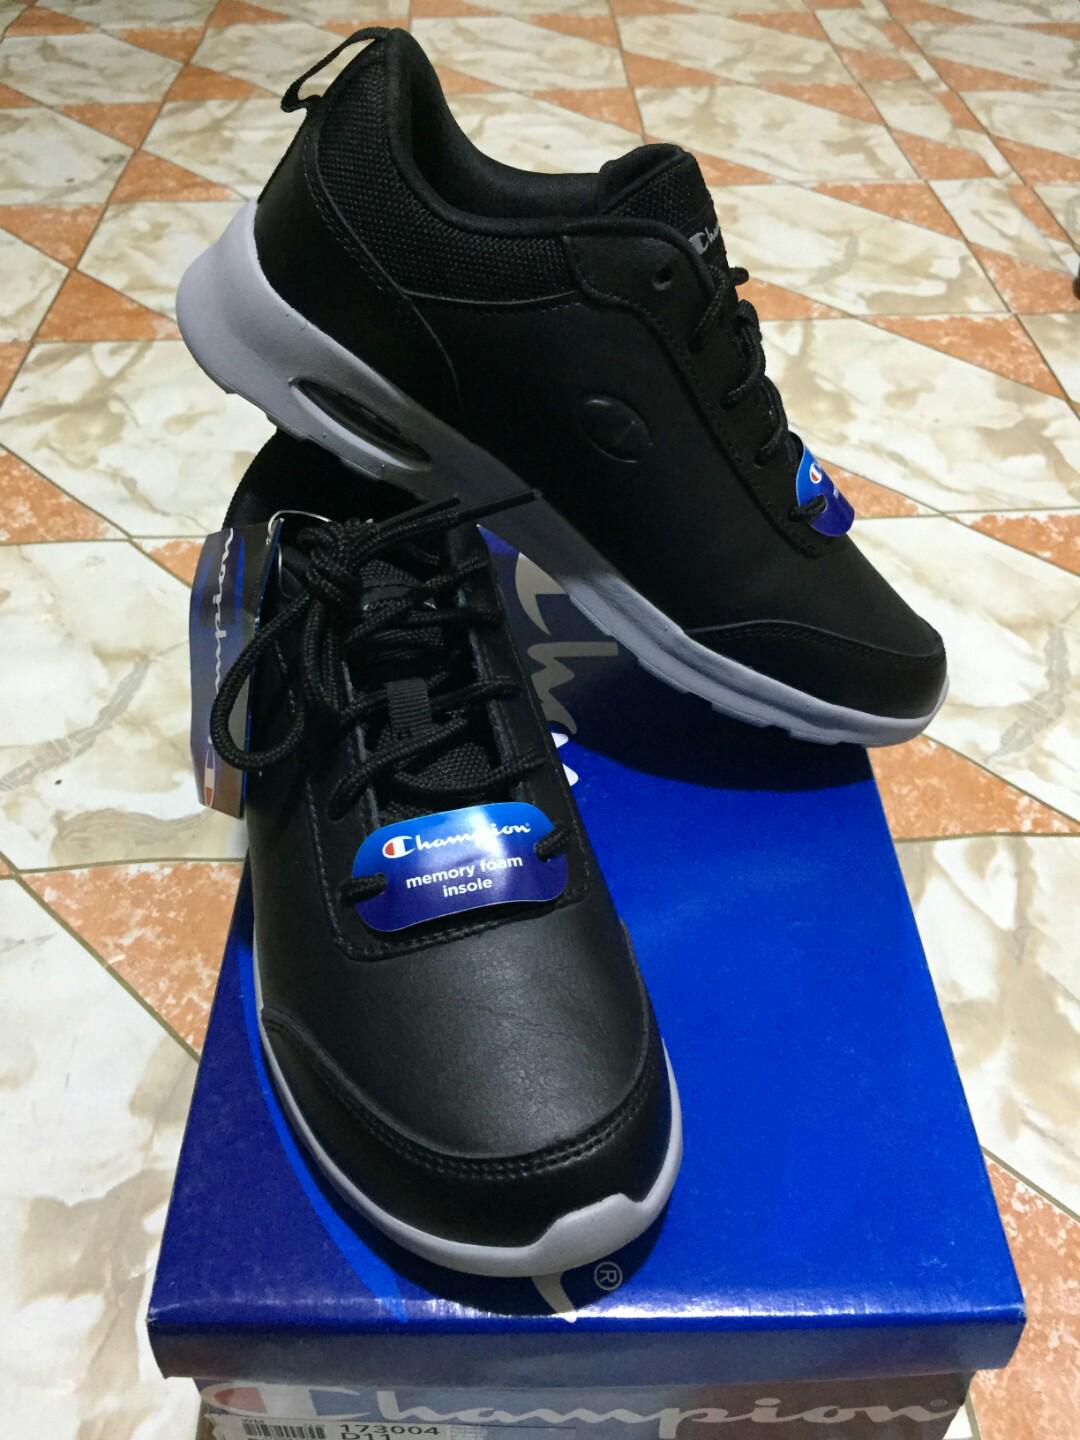 payless shoes champion sneakers